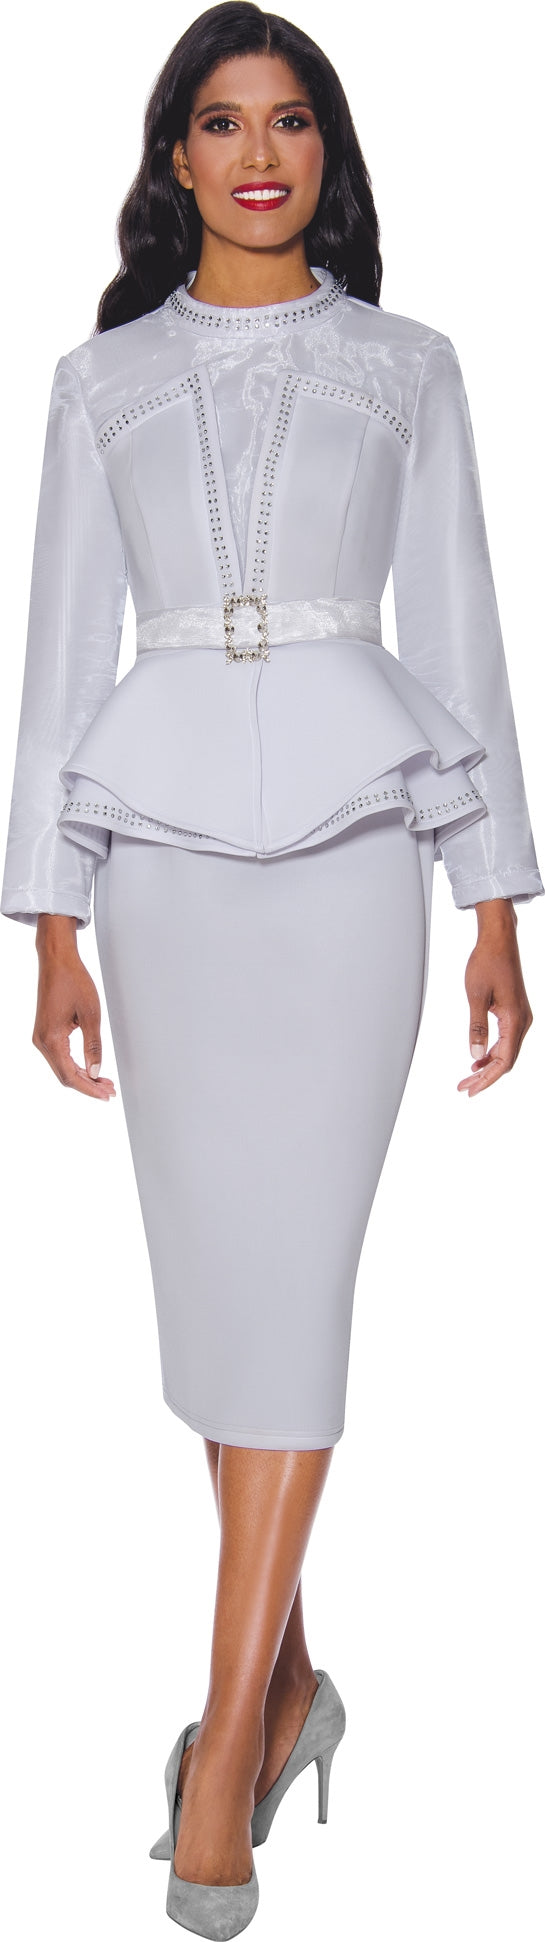 Stellar Looks Skirt Suit 1742-White - Church Suits For Less